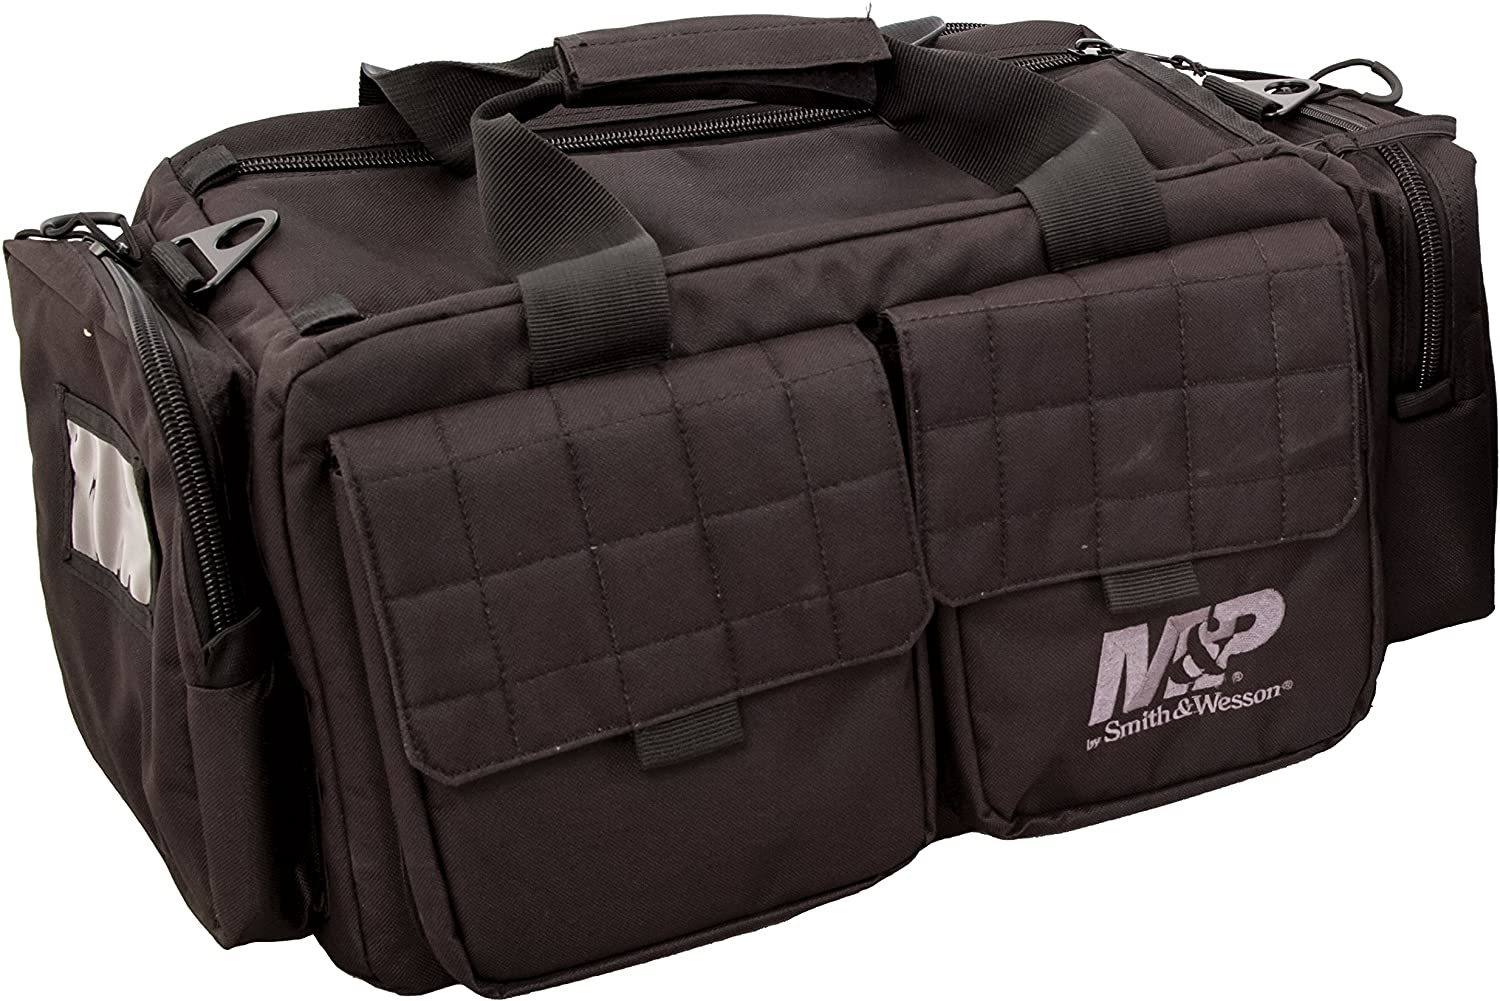 SMITH & WESSON S&W and M&P Tactical Range Bags